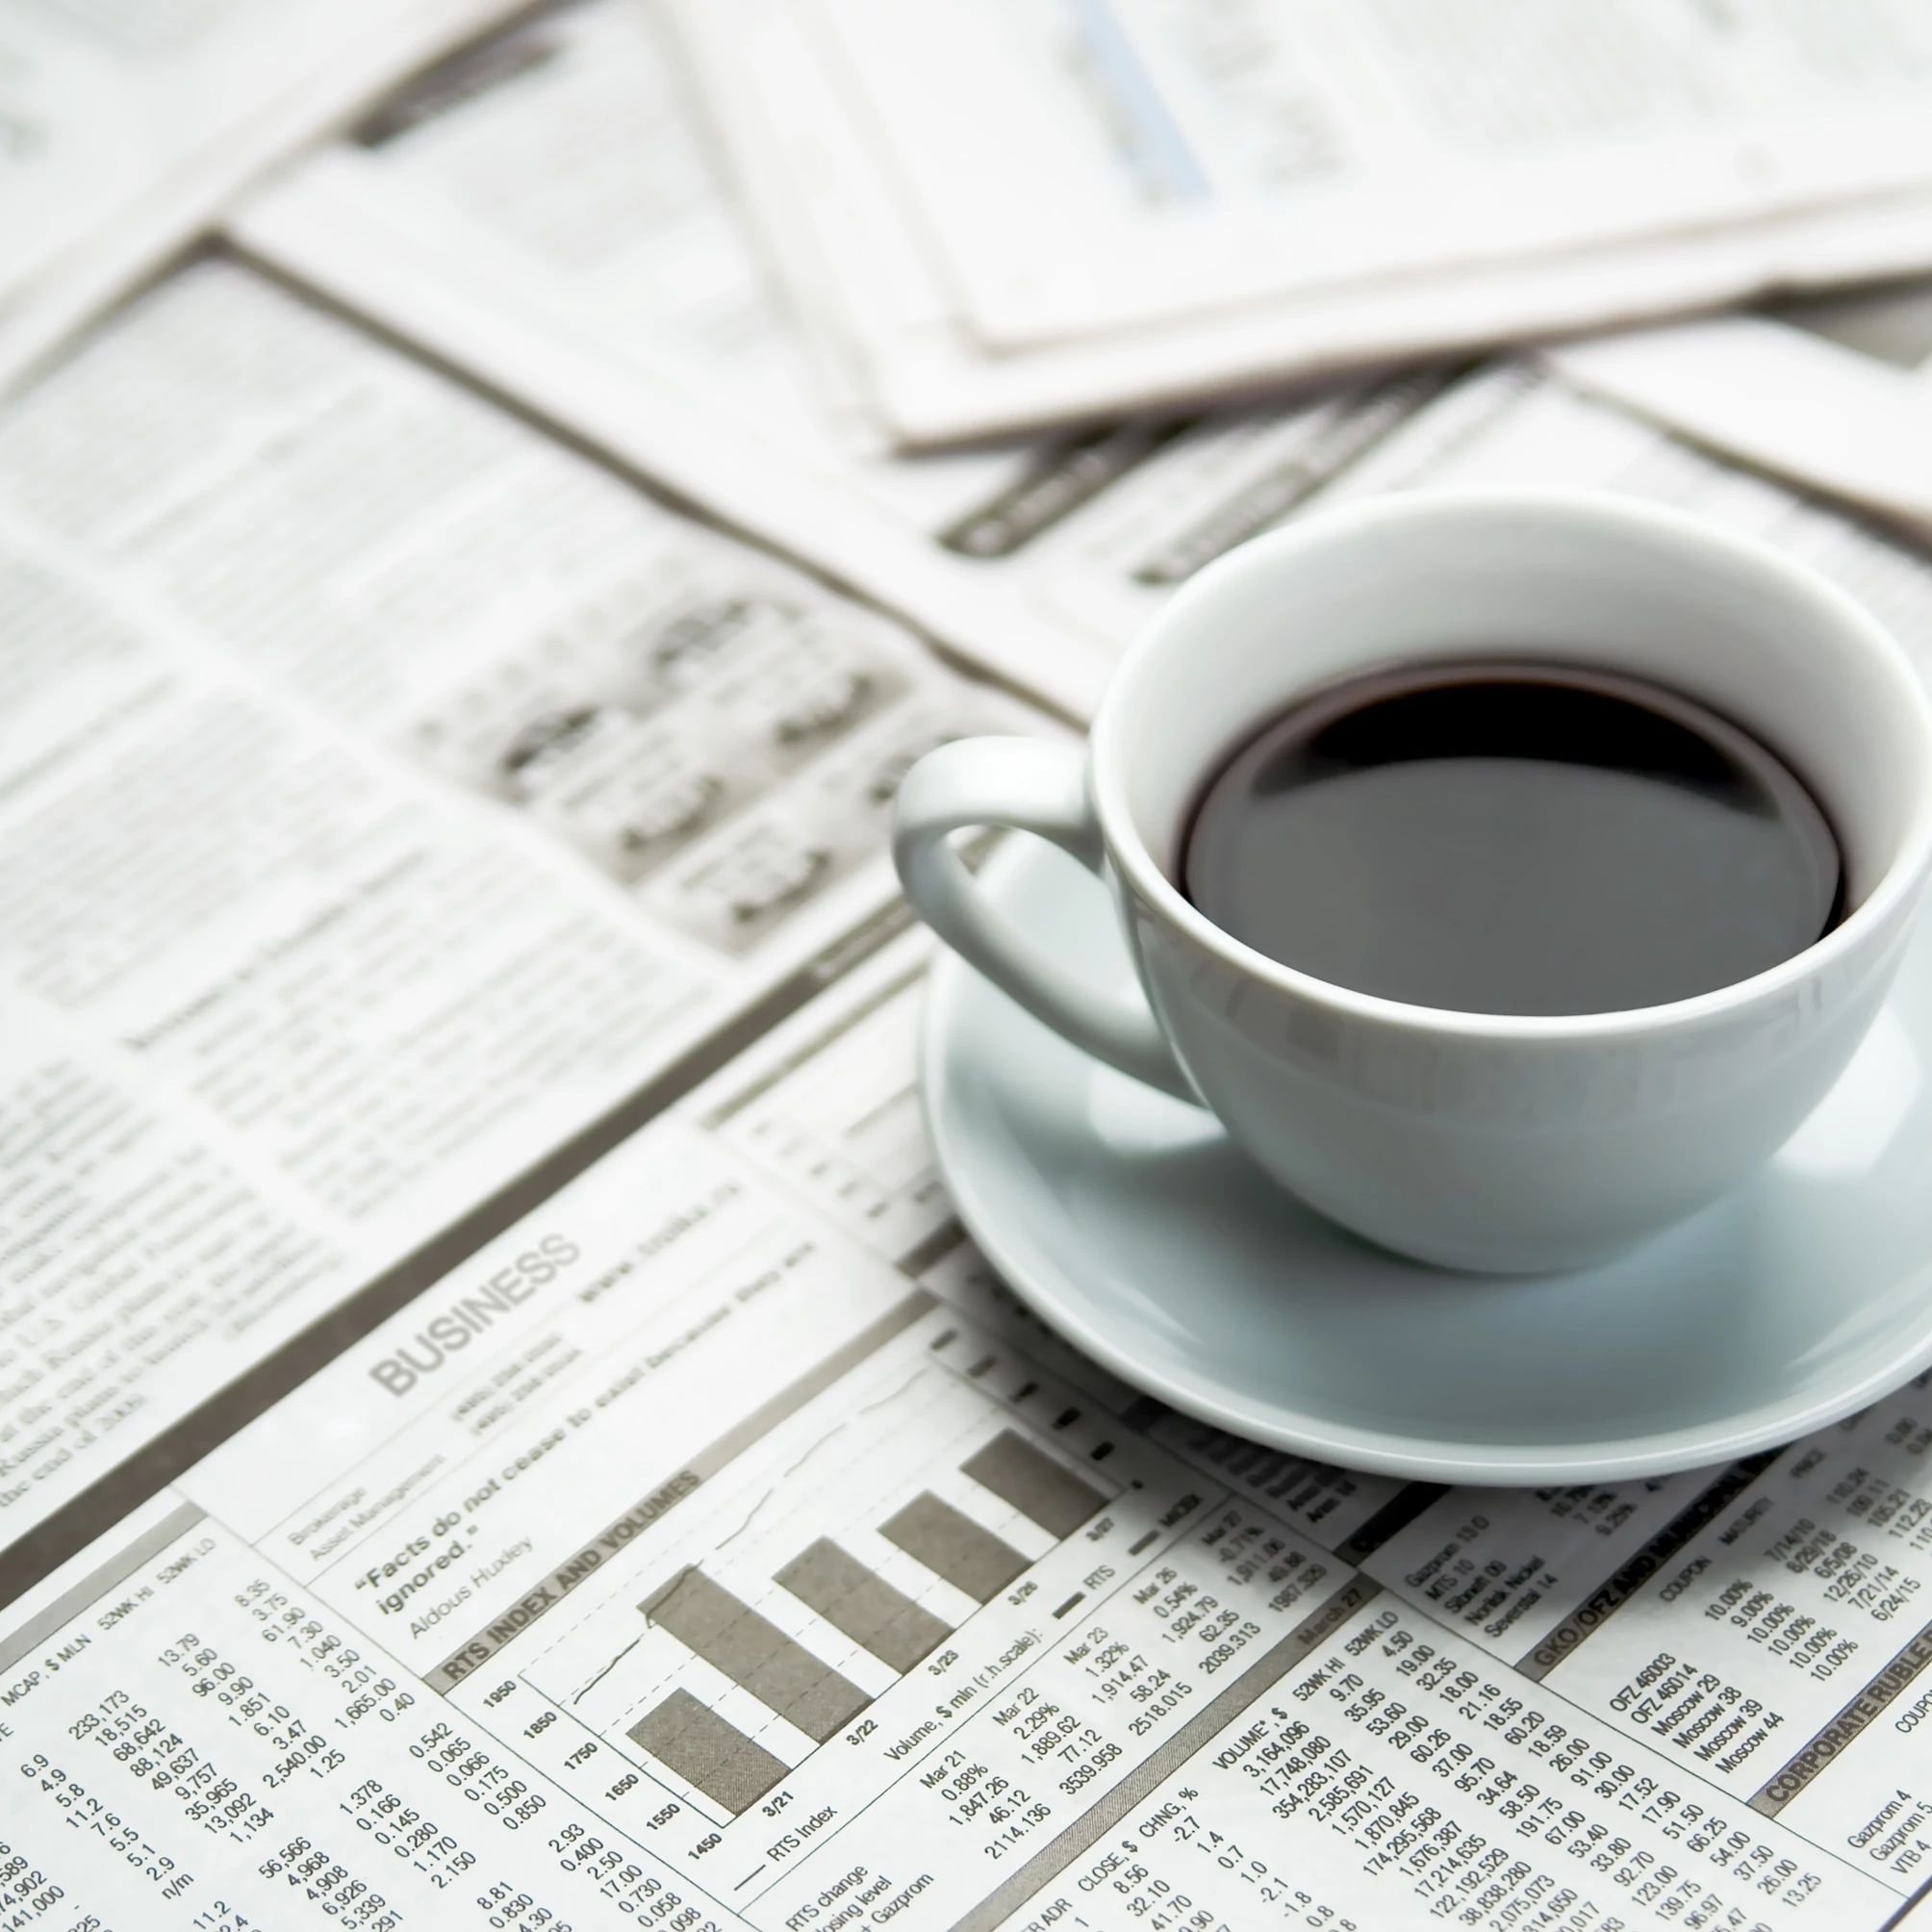 A cup of coffee on the newspaper from Carpet 4 Less in Antioch